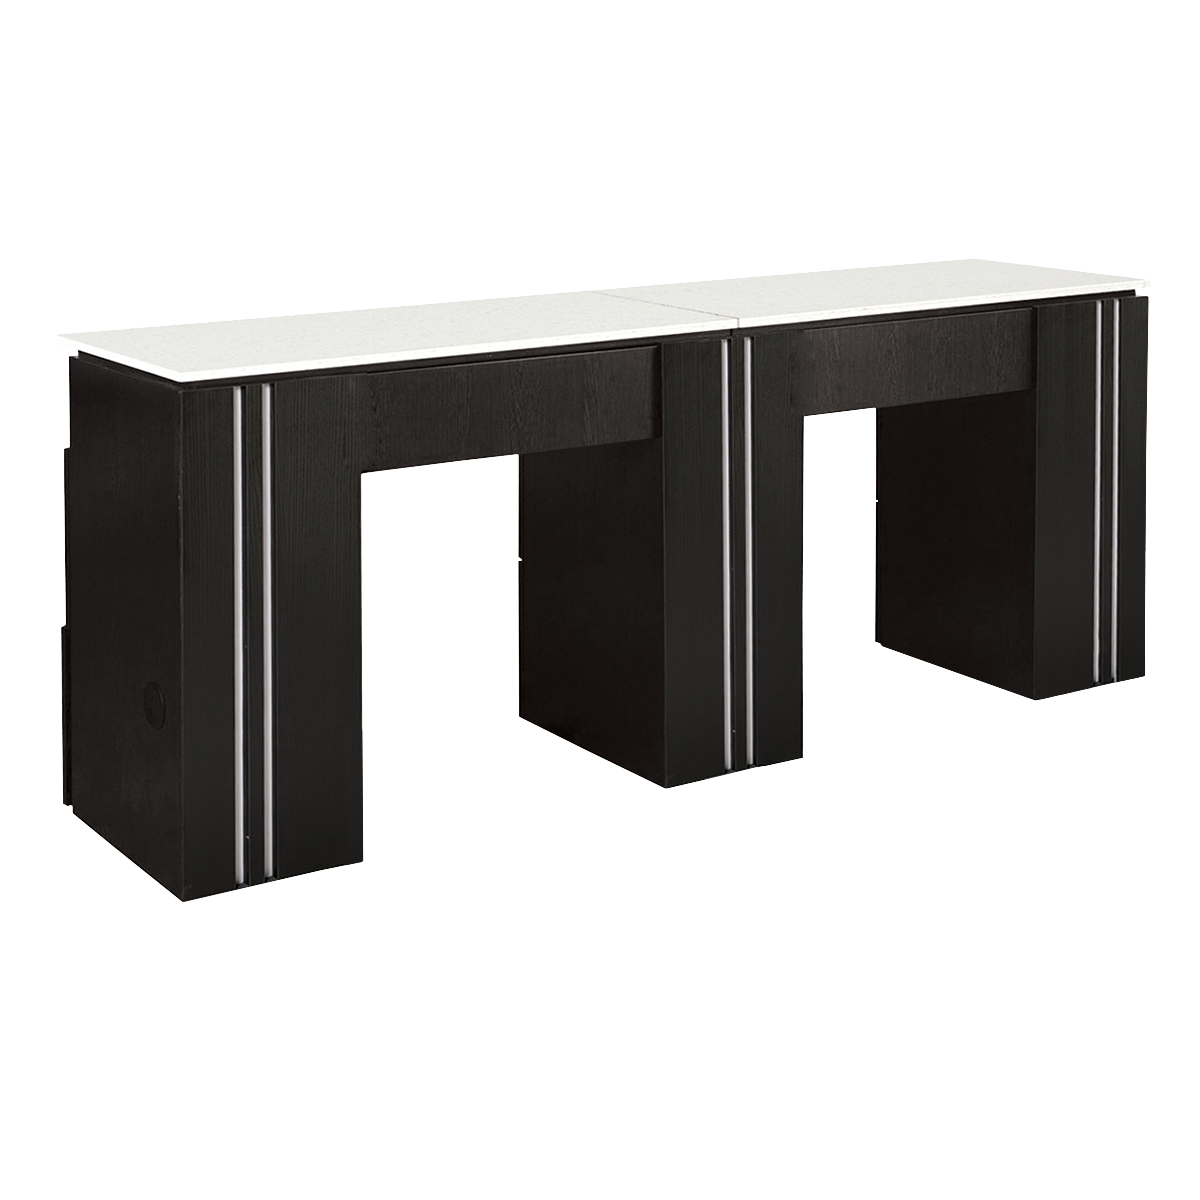 Whale Spa Black Double Manicure Table NM906D Manicure Table for Two Customers with Drawers | Salon and Spa Furniture